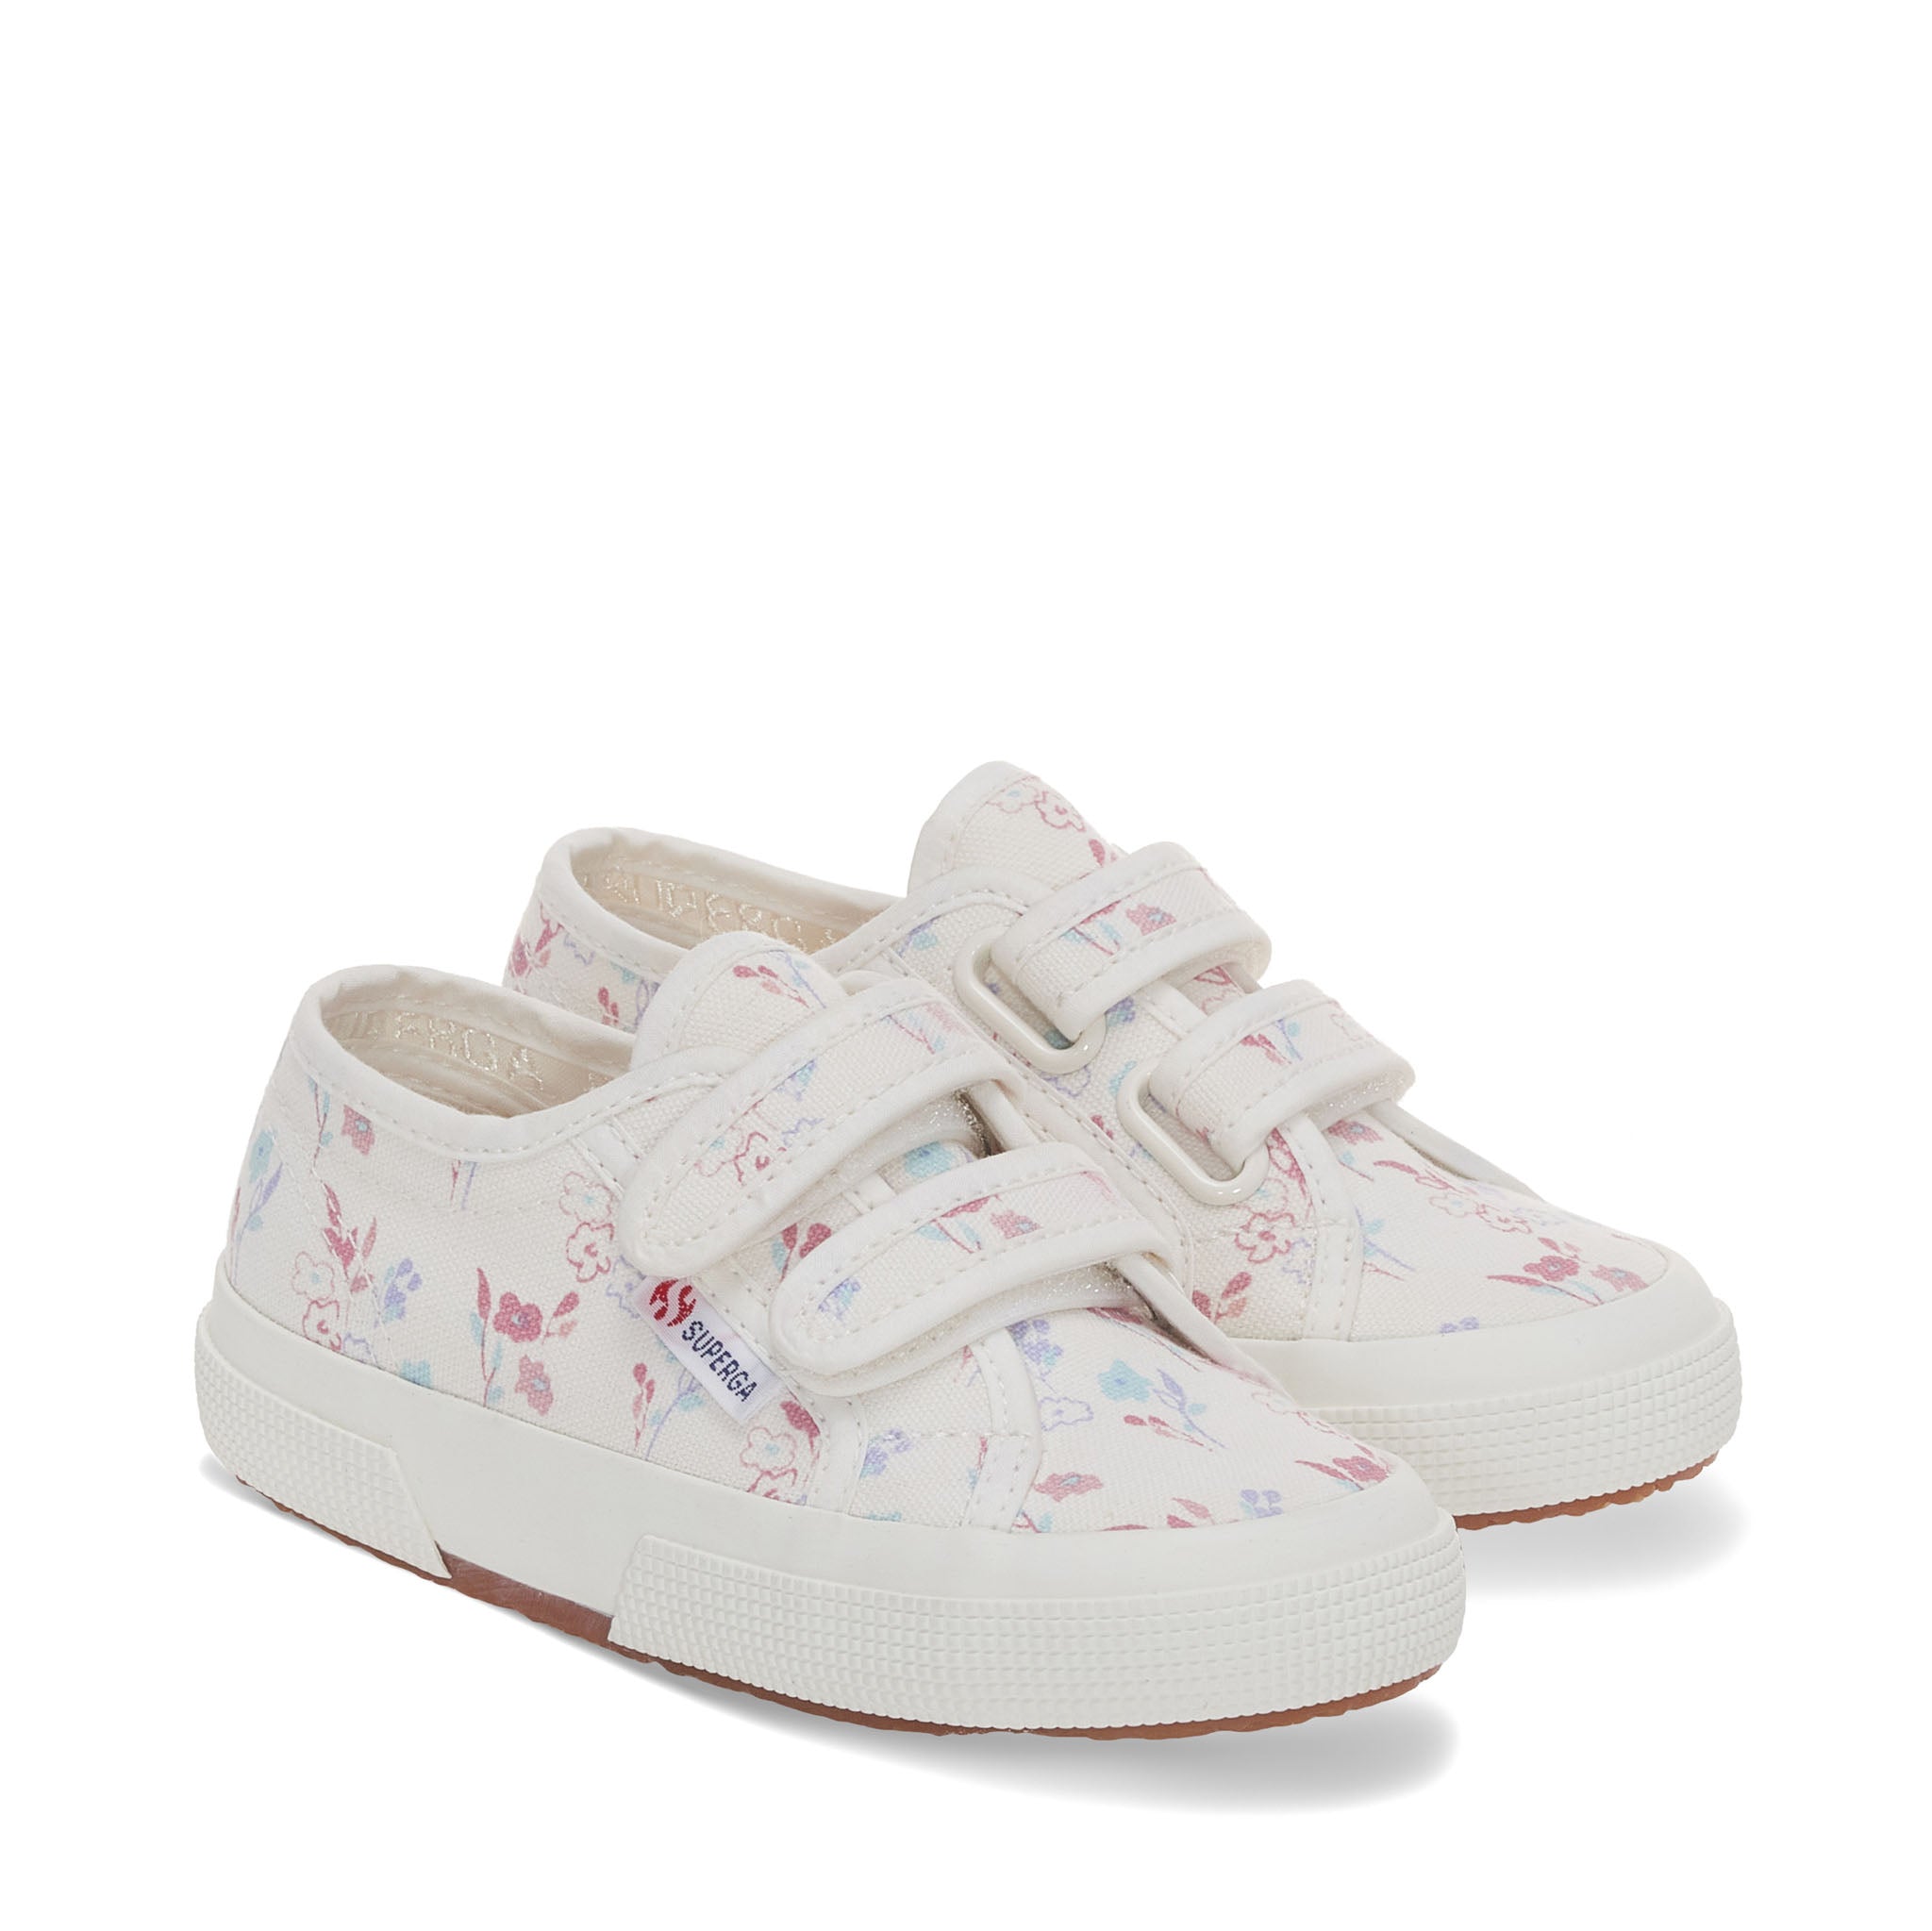 Superga 2750 Kids Straps Flowers Sneakers - White Floral. Front view.